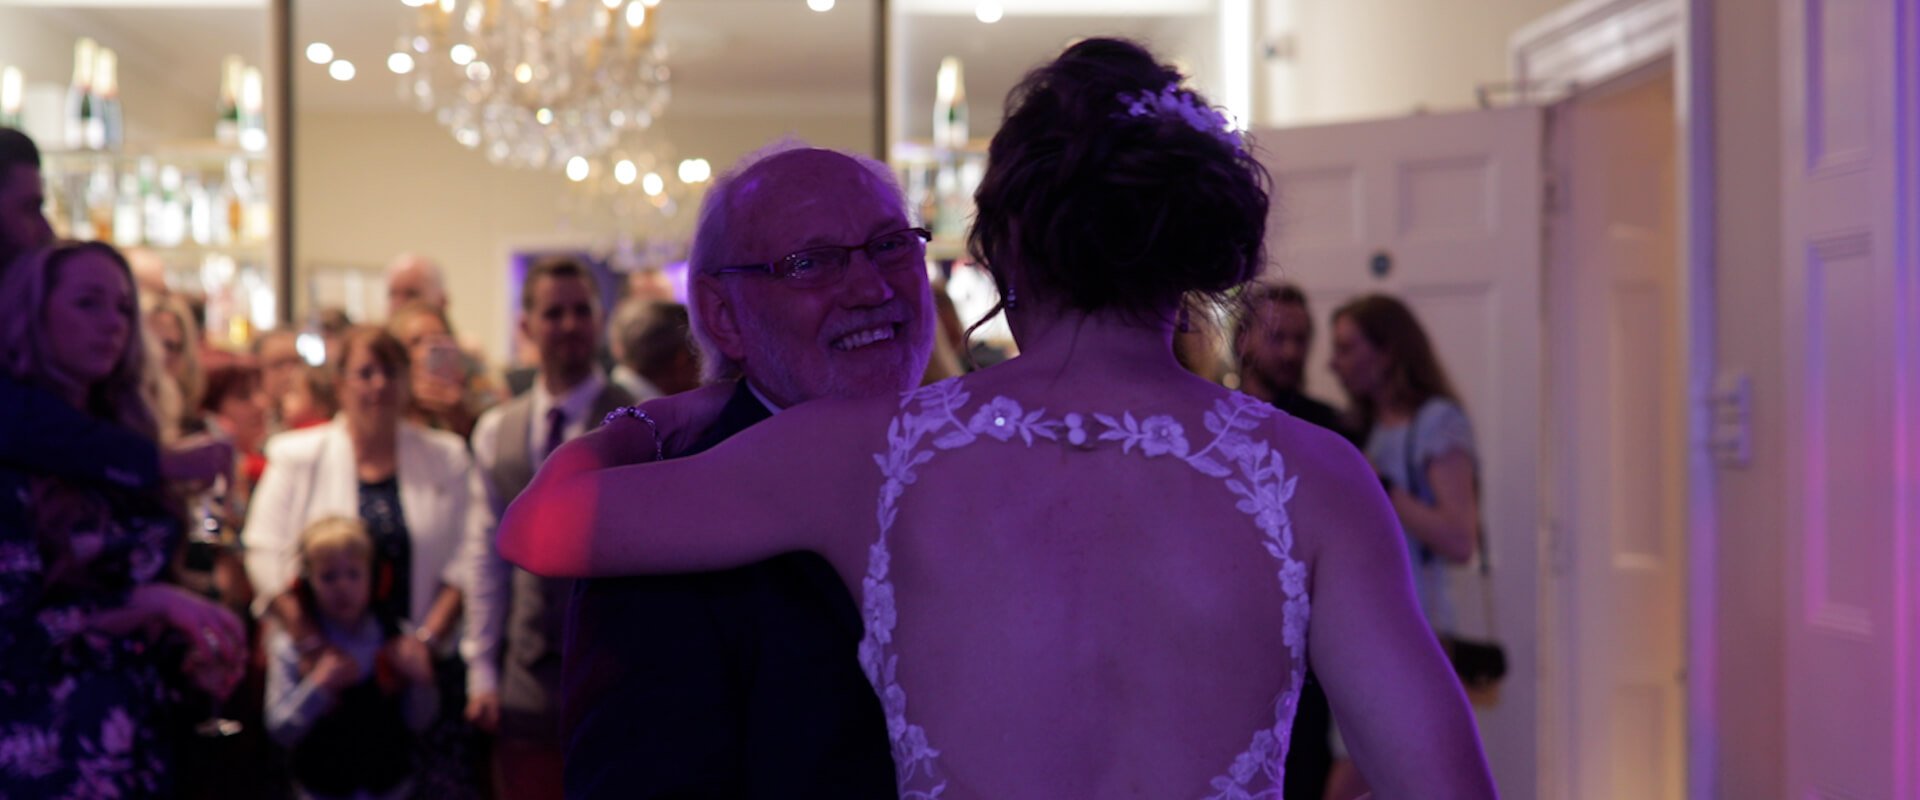 Zayna and her Father dance together during the Father/Daughter wedding dance.